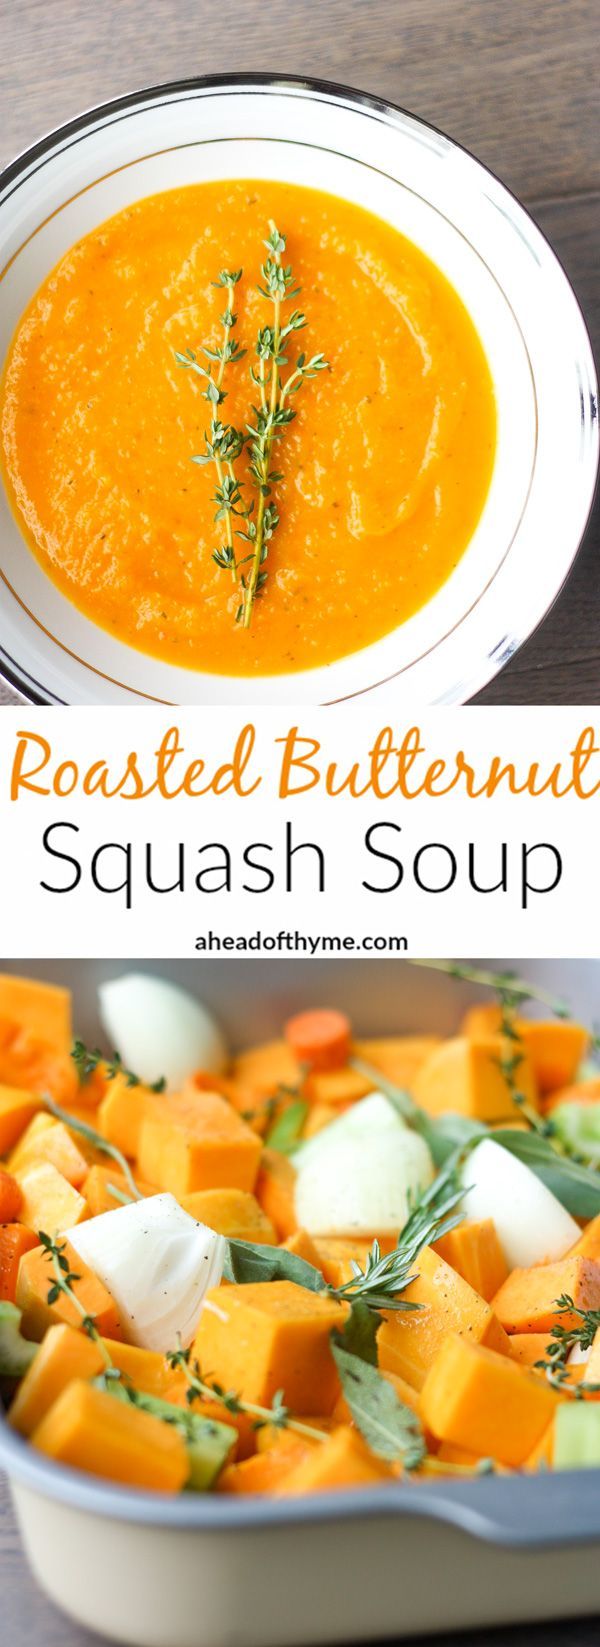 Roasted Butternut Squash Soup: This delicious roasted butternut squash soup sums u